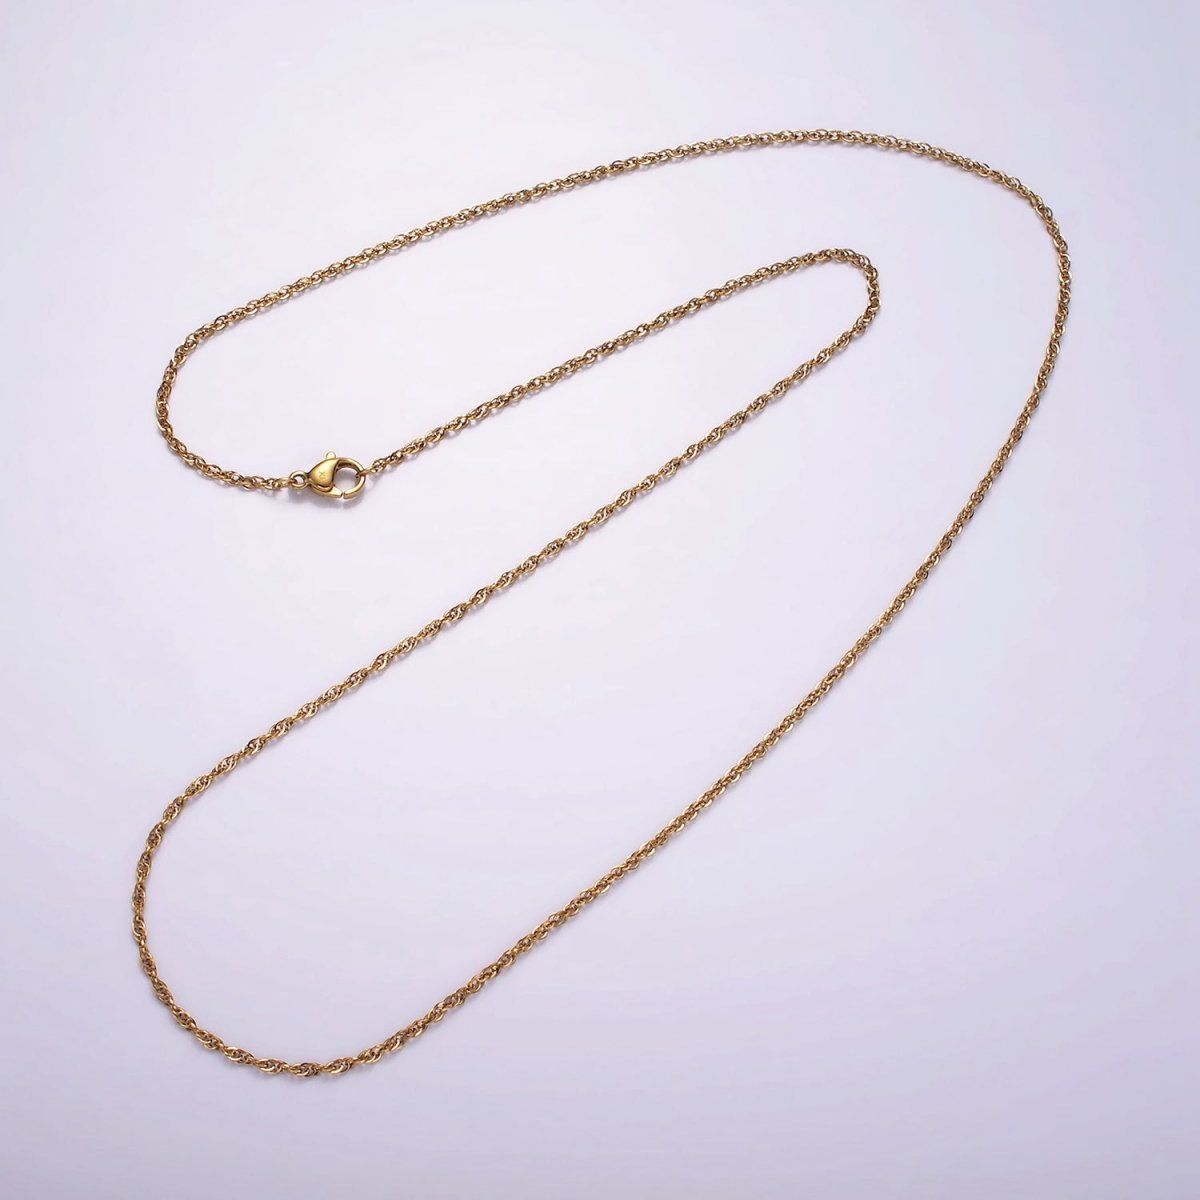 Stainless Steel Espiga Wheat Chain - Beautifully Unique - Double Cable Chain Necklace 23.6 inch | WA-2363 WA-2406 - DLUXCA